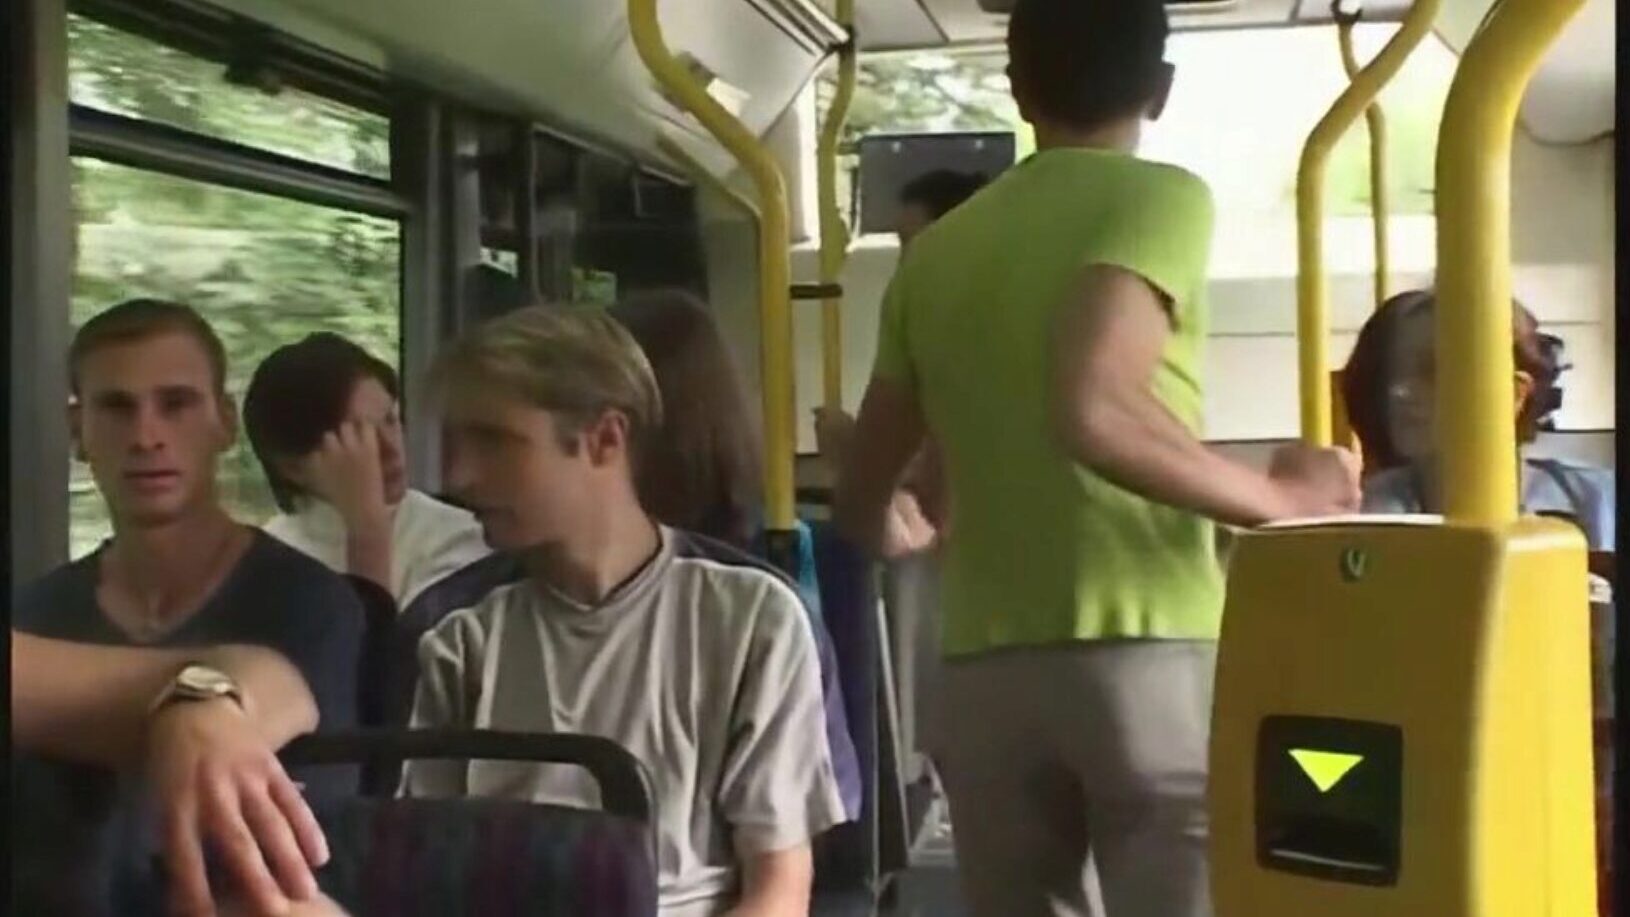 Laura Lion Public fuck on a bus upscaled to 4k from natural minions of the world 20 (2002). upscaled from 480p with topaz video boost ai.